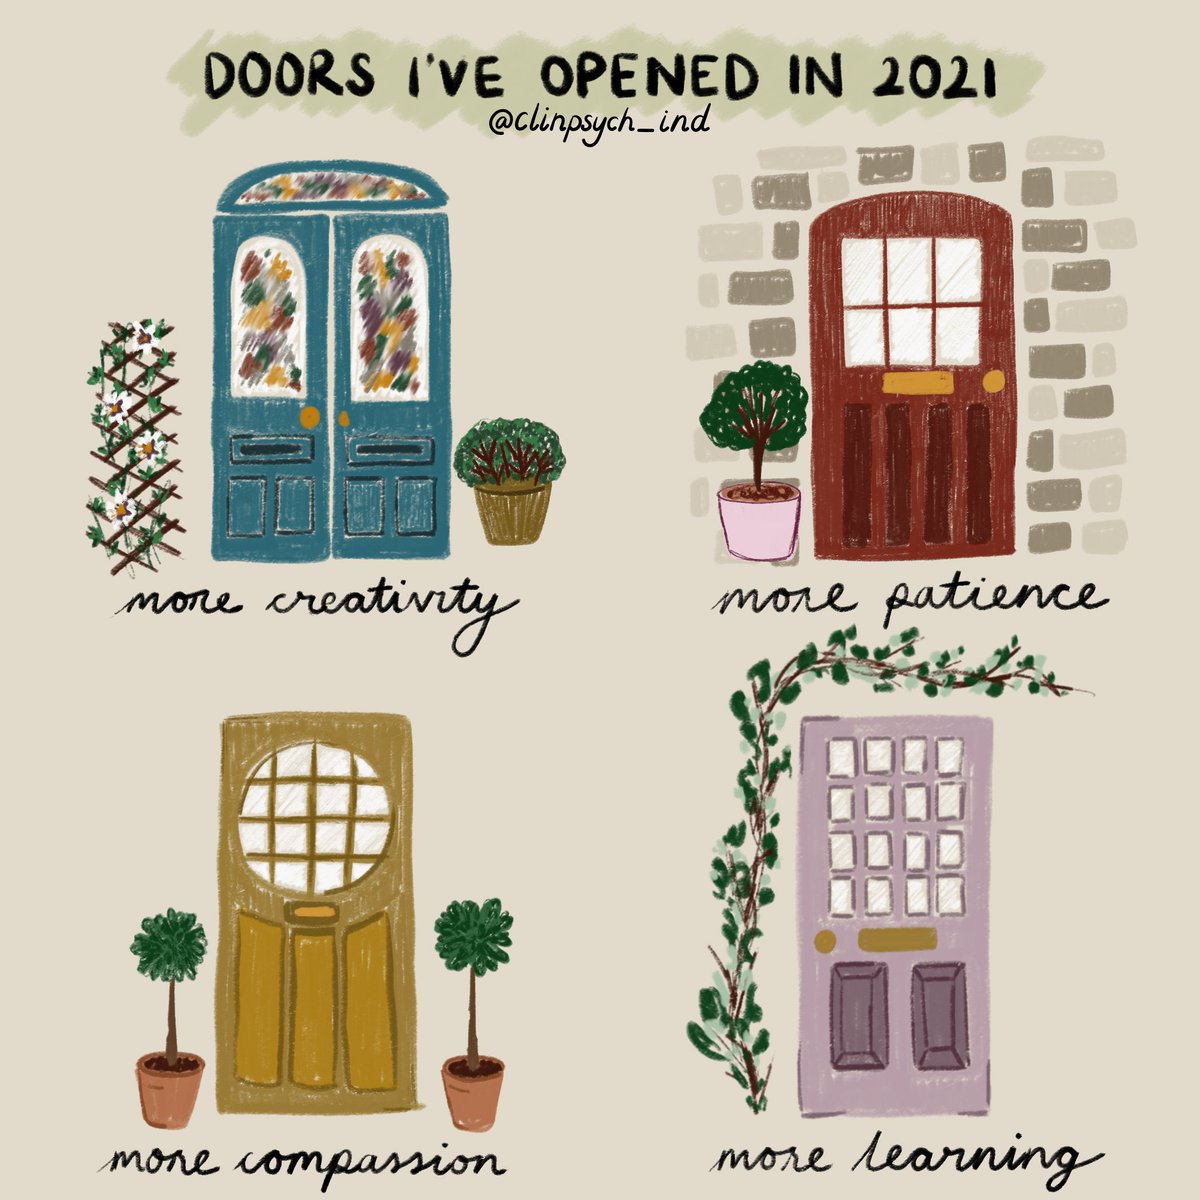 ✨happy new year✨ I used the festive break to try out a new way of drawing and ended up with this post of my reflections from 2021. here's to moving more towards my values in 2022!